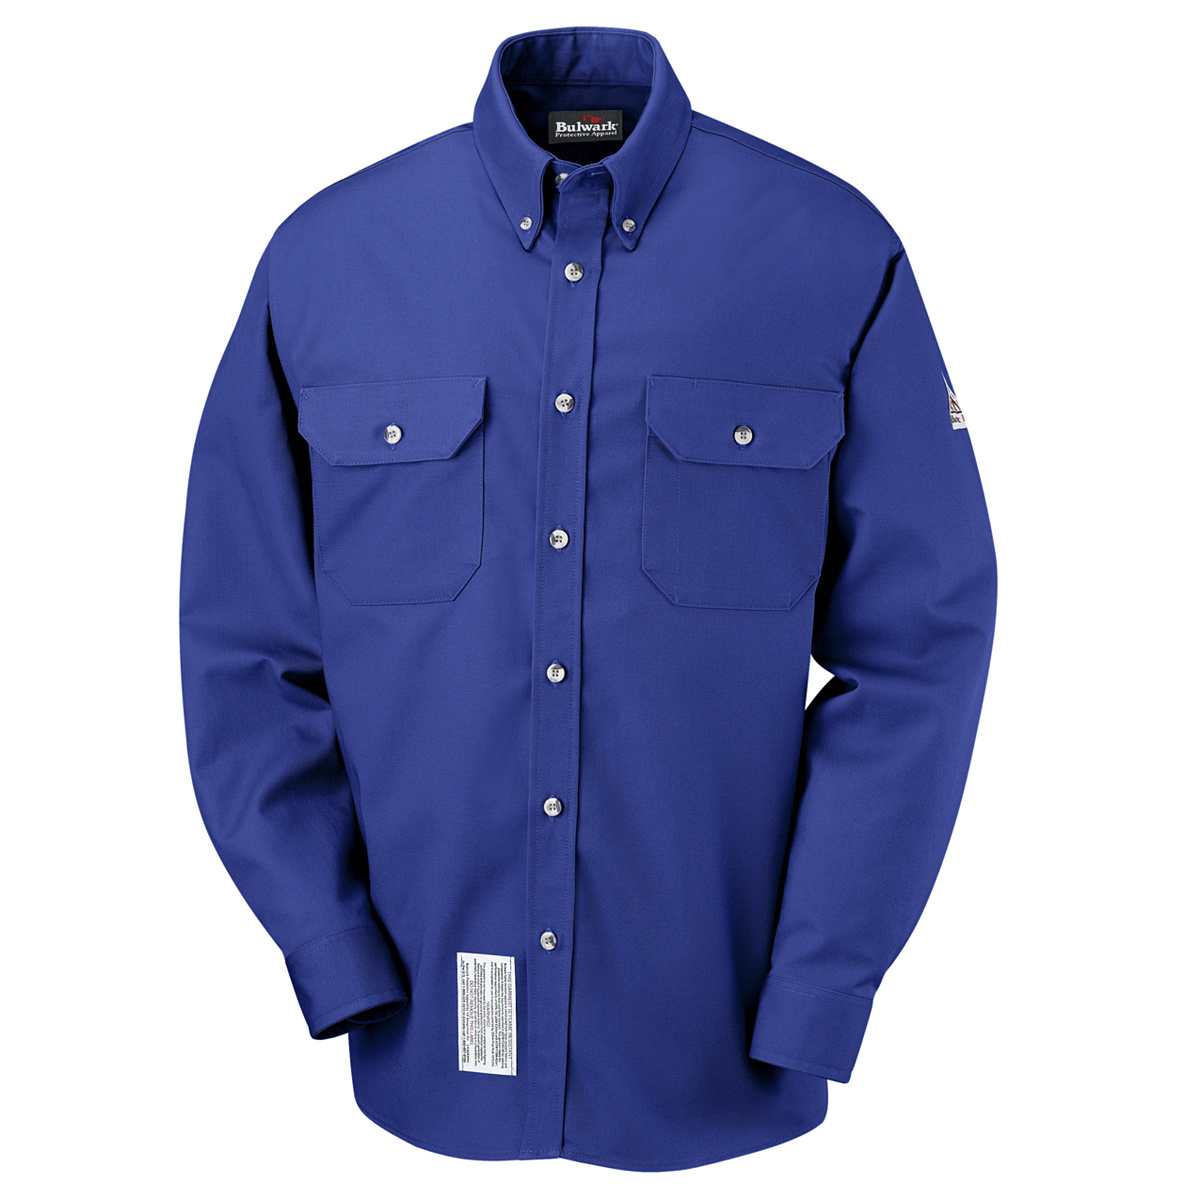 Bulwark® 2X Tall Royal Blue Westex Ultrasoft®/Cotton/Nylon Flame Resistant Dress Shirt With Button Front Closure